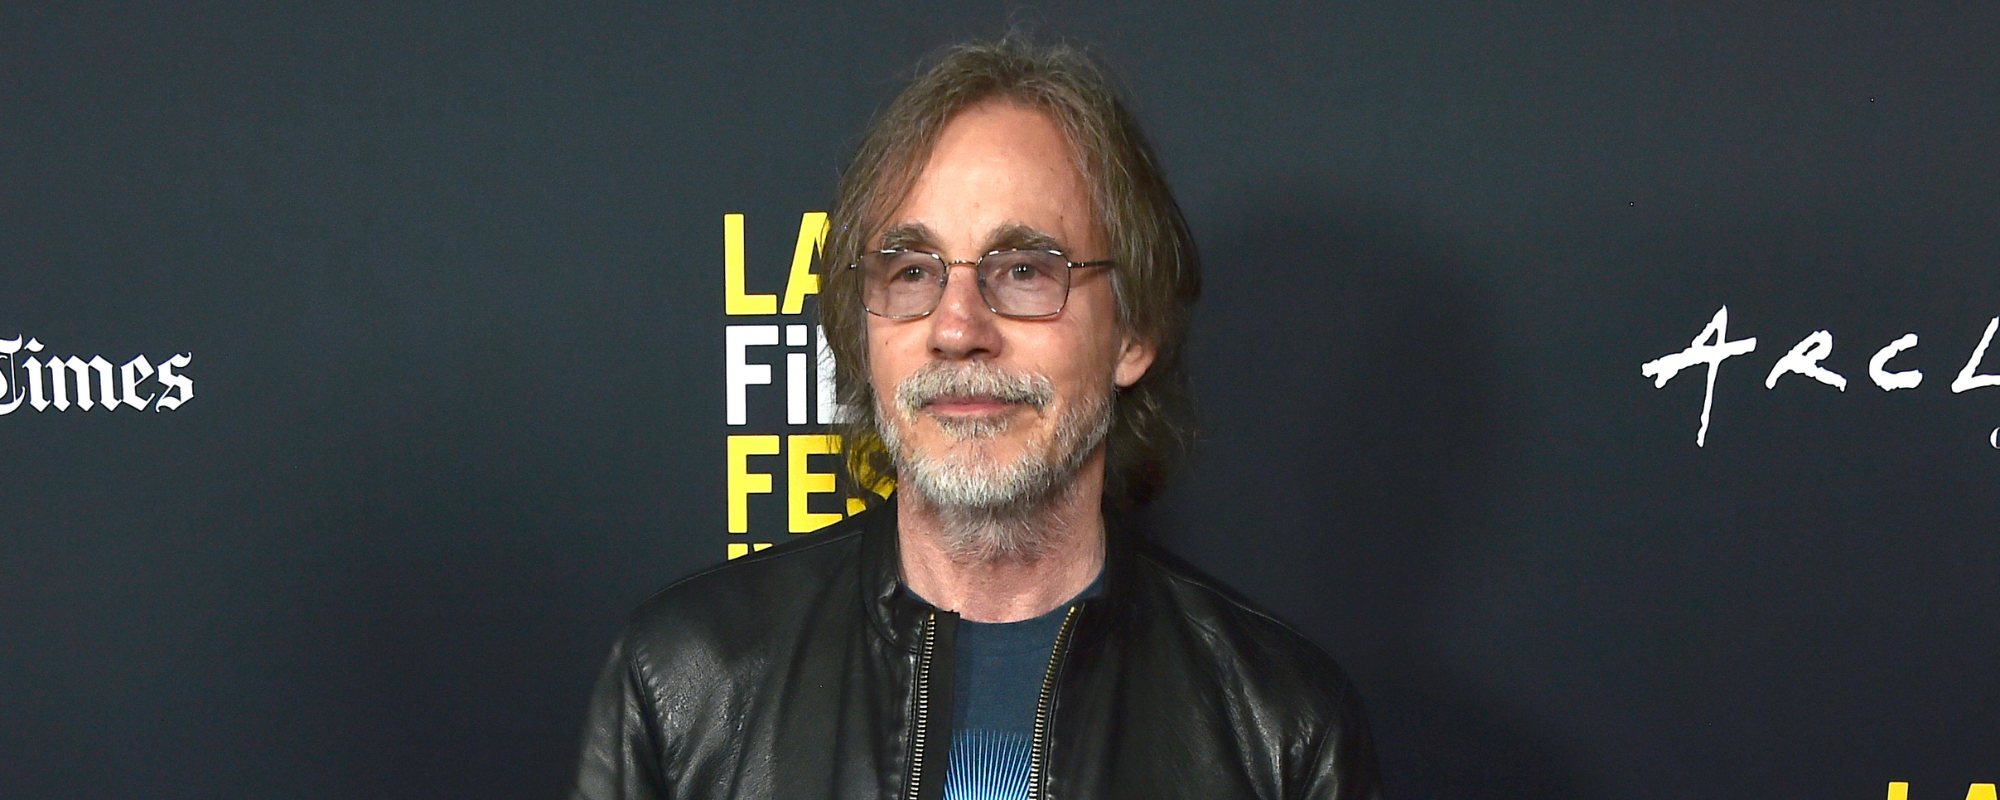 5 Jackson Browne Slow Songs You Might Not Know, But Should